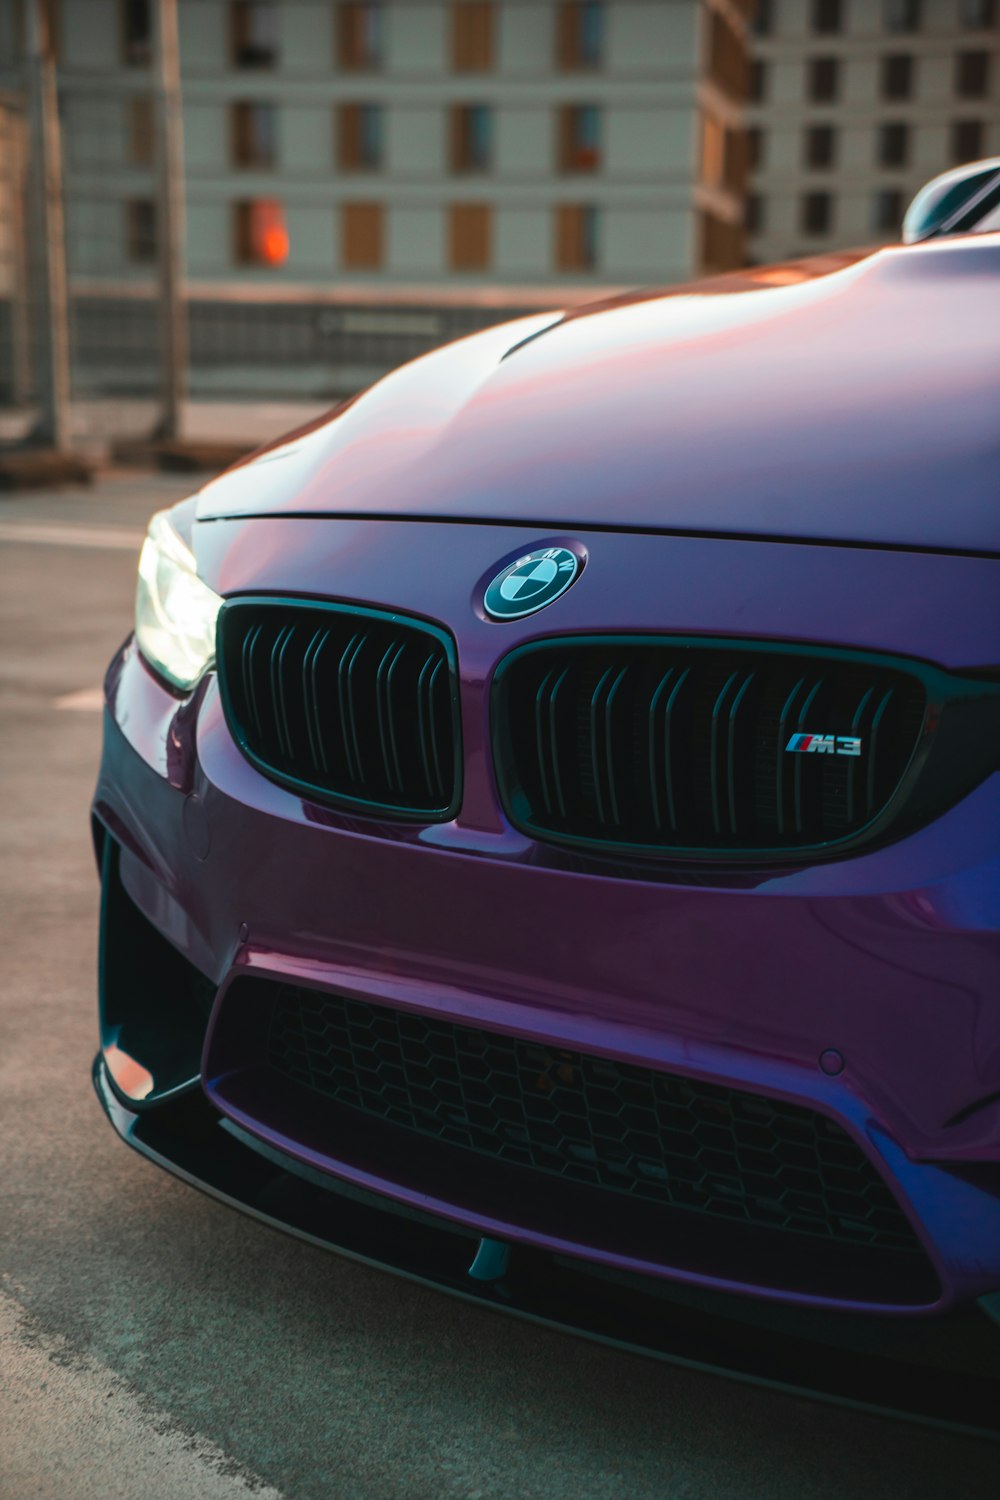 a close up of the front of a purple car